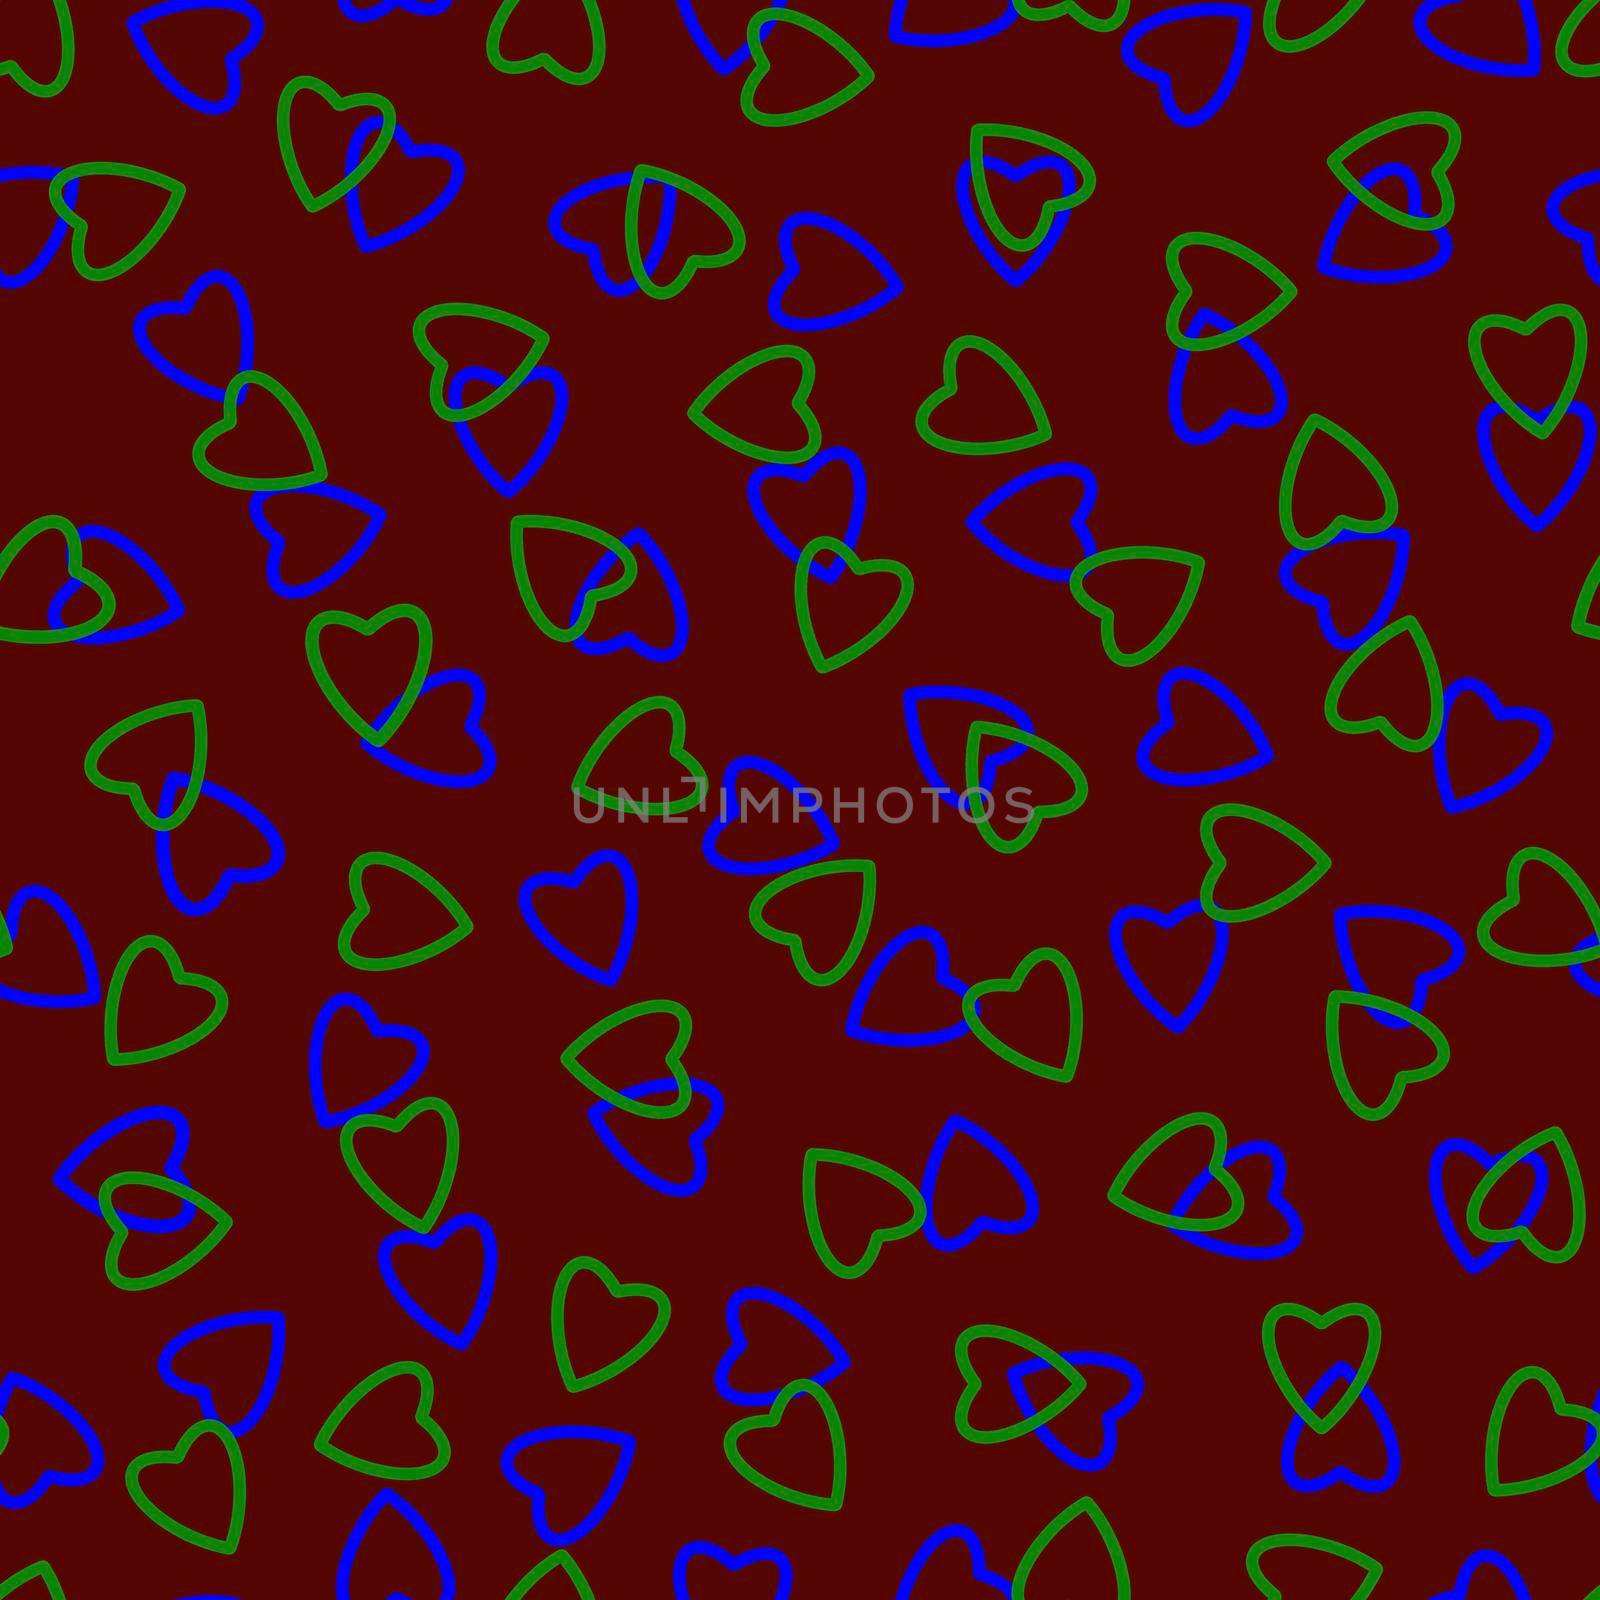 Simple hearts seamless pattern,endless chaotic texture made tiny heart silhouettes.Valentines,mothers day background.Blue,green,burgundy.Great for Easter,wedding,scrapbook,gift wrapping paper,textiles